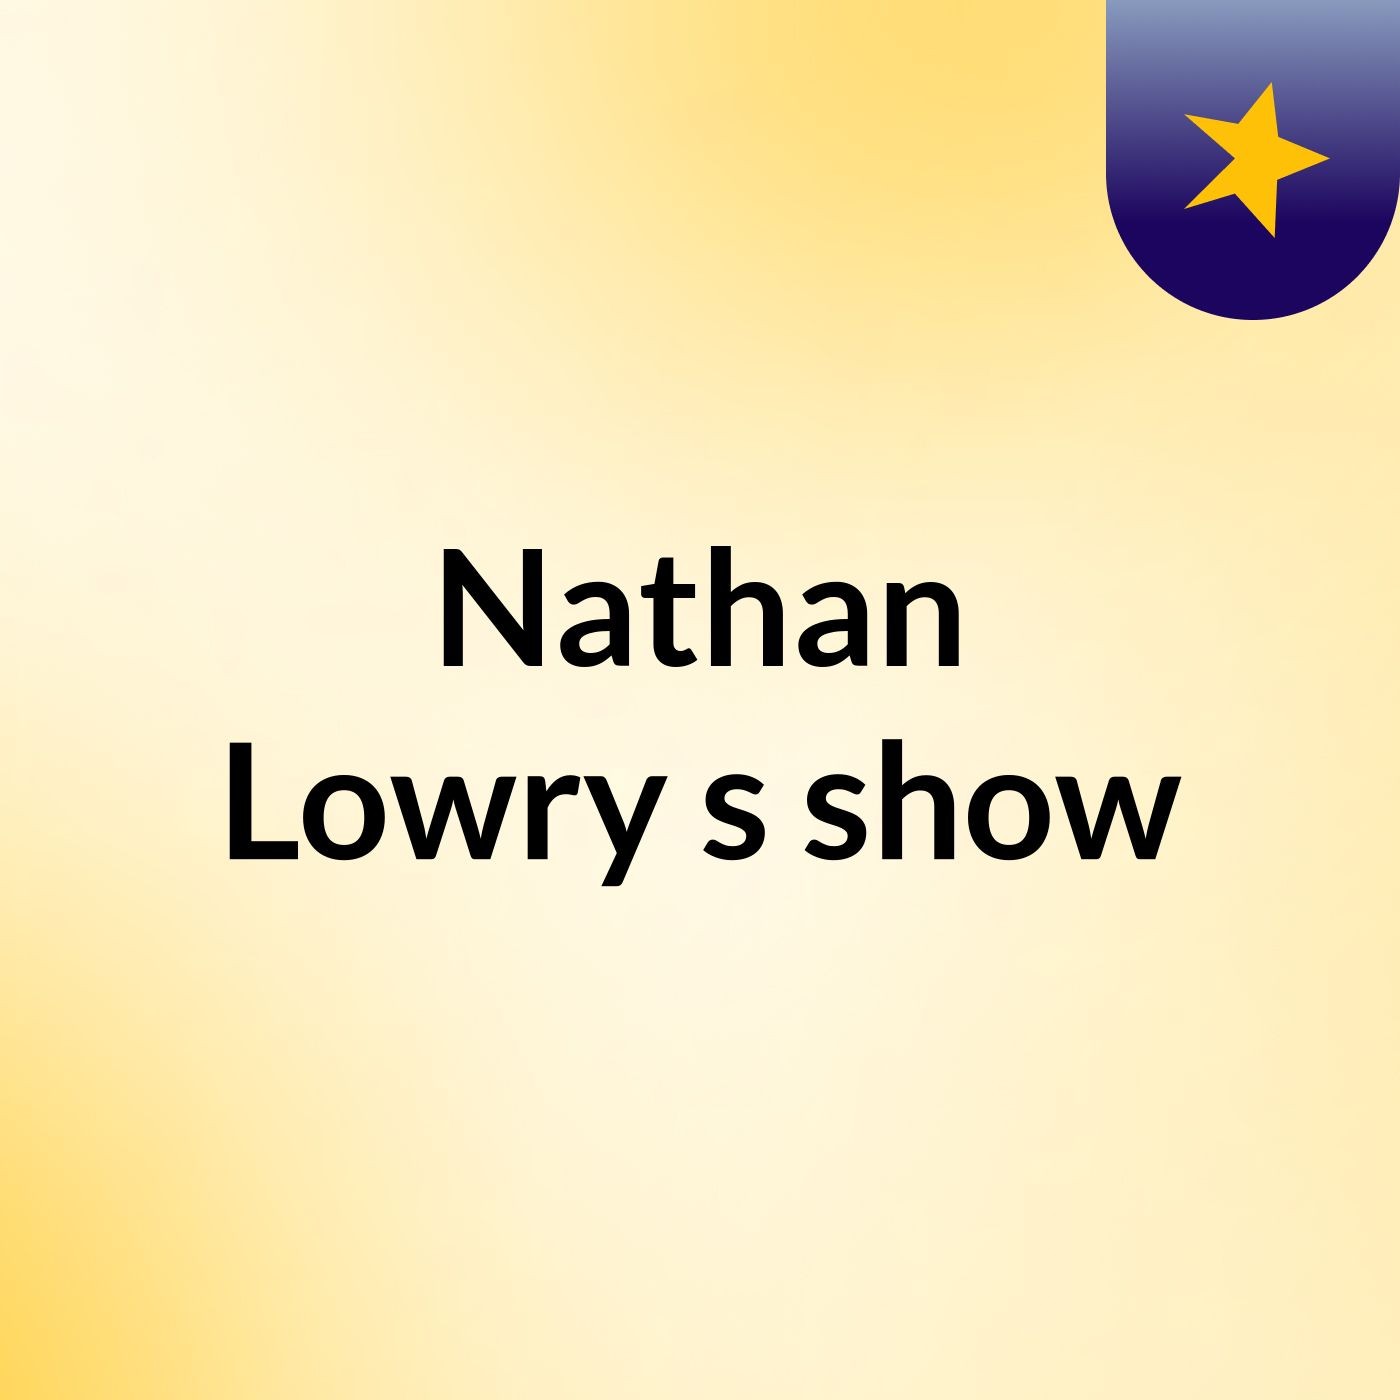 Nathan Lowry's show